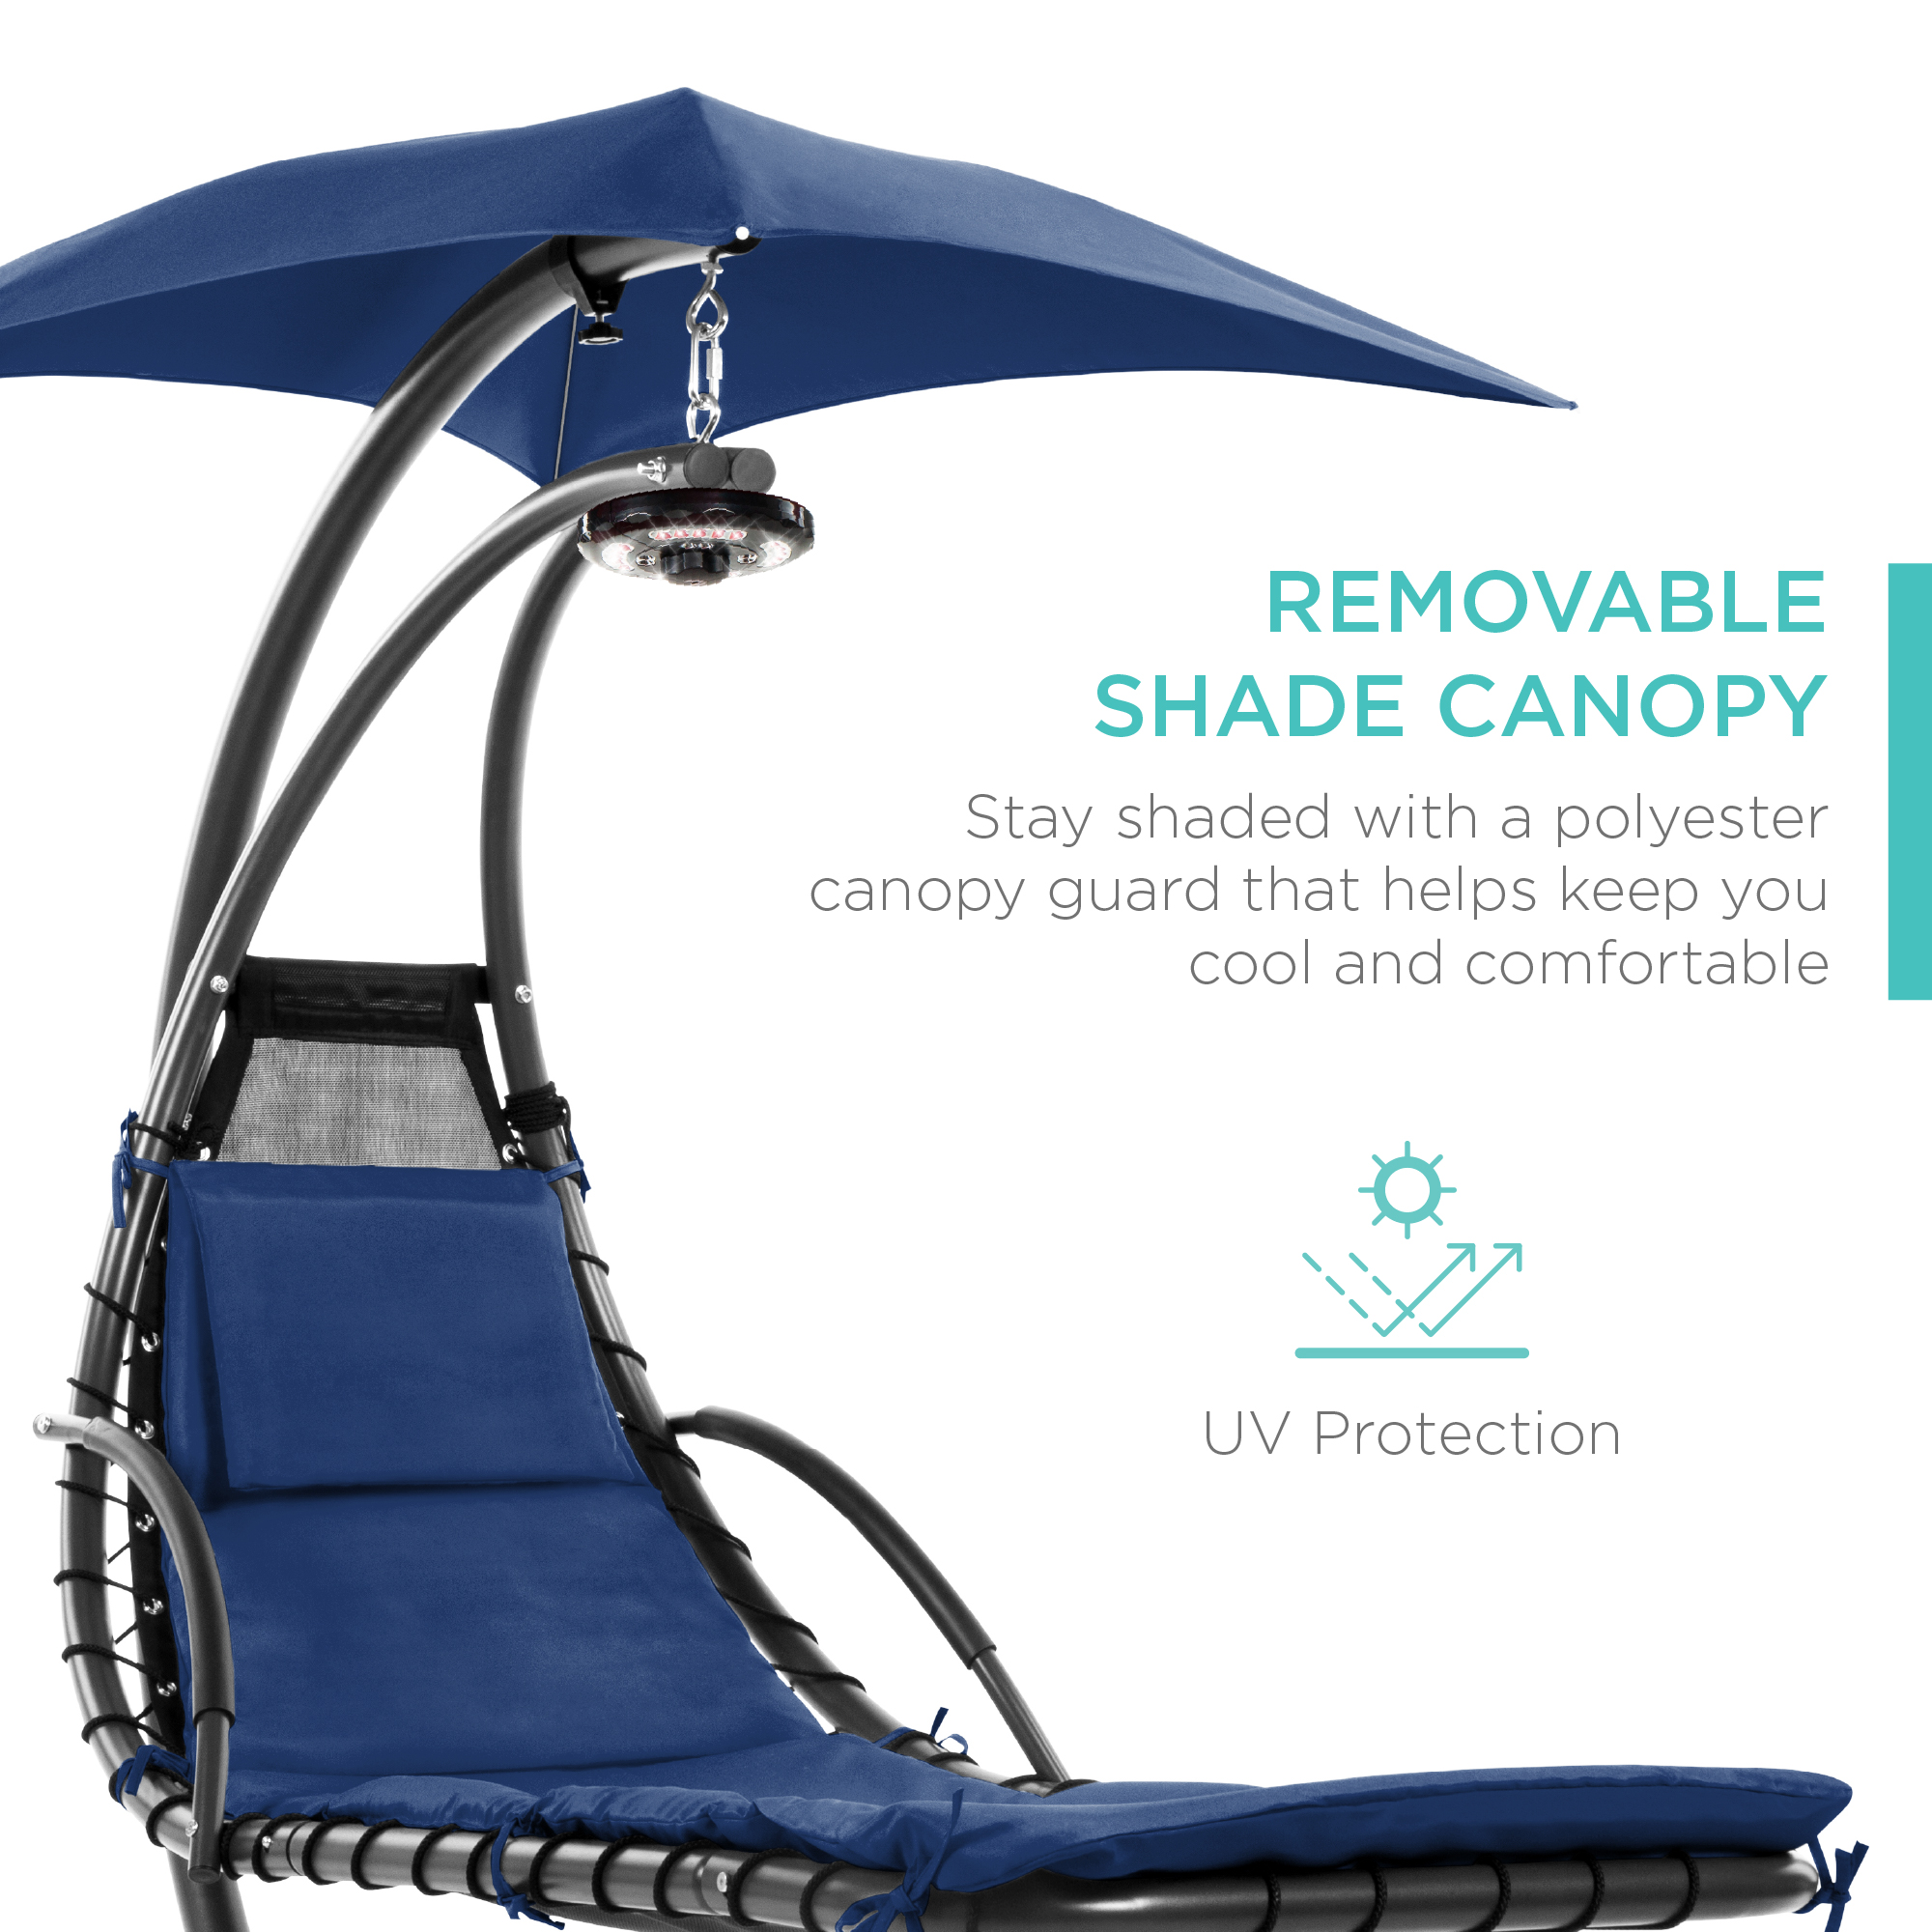 Best Choice Products Hanging LED-Lit Curved Chaise Lounge Chair for Backyard, Patio w/ Pillow, Canopy, Stand - Navy - image 4 of 7